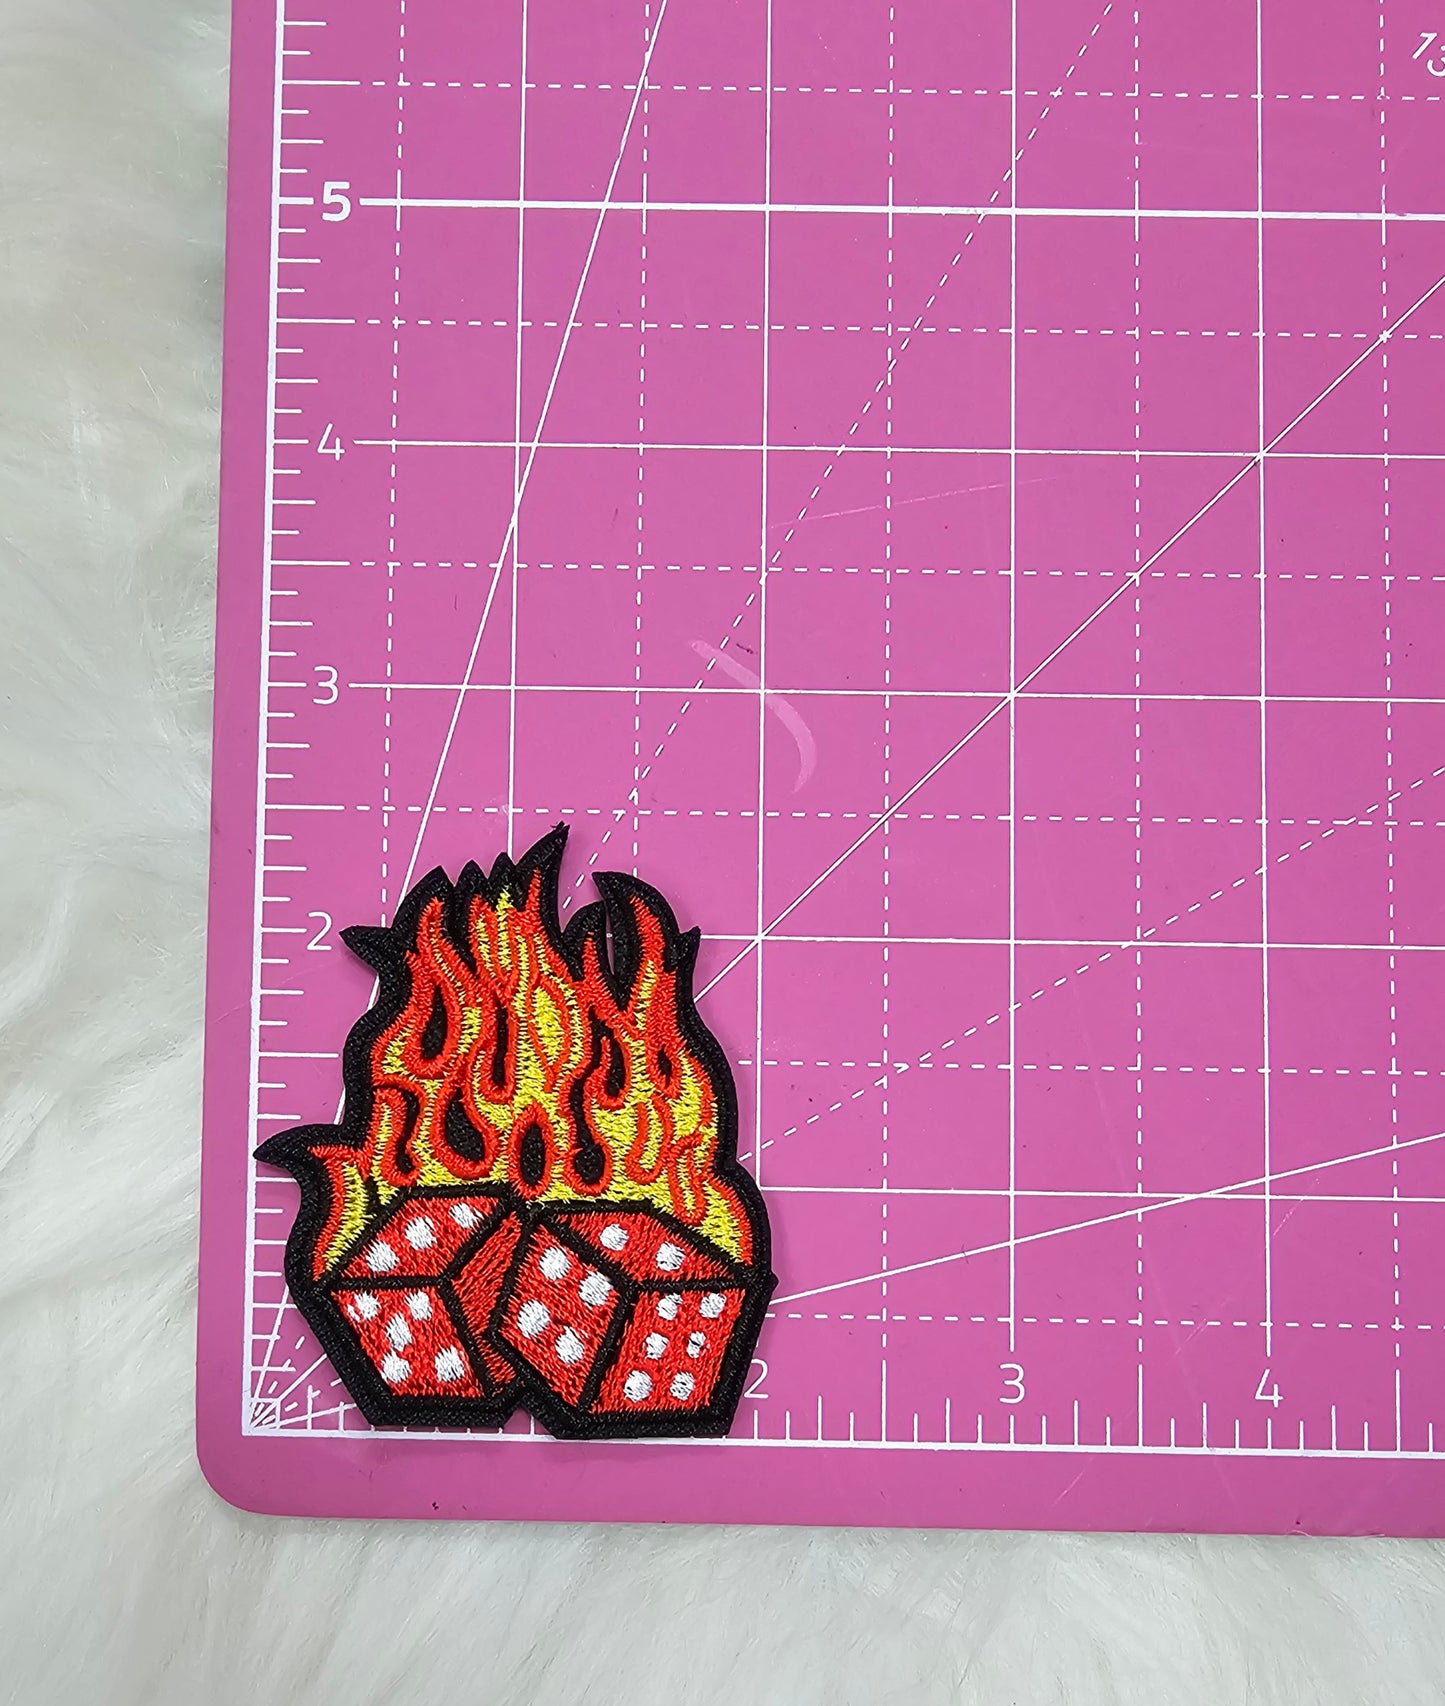 Flaming Red Dice Embroidery Iron On Patch